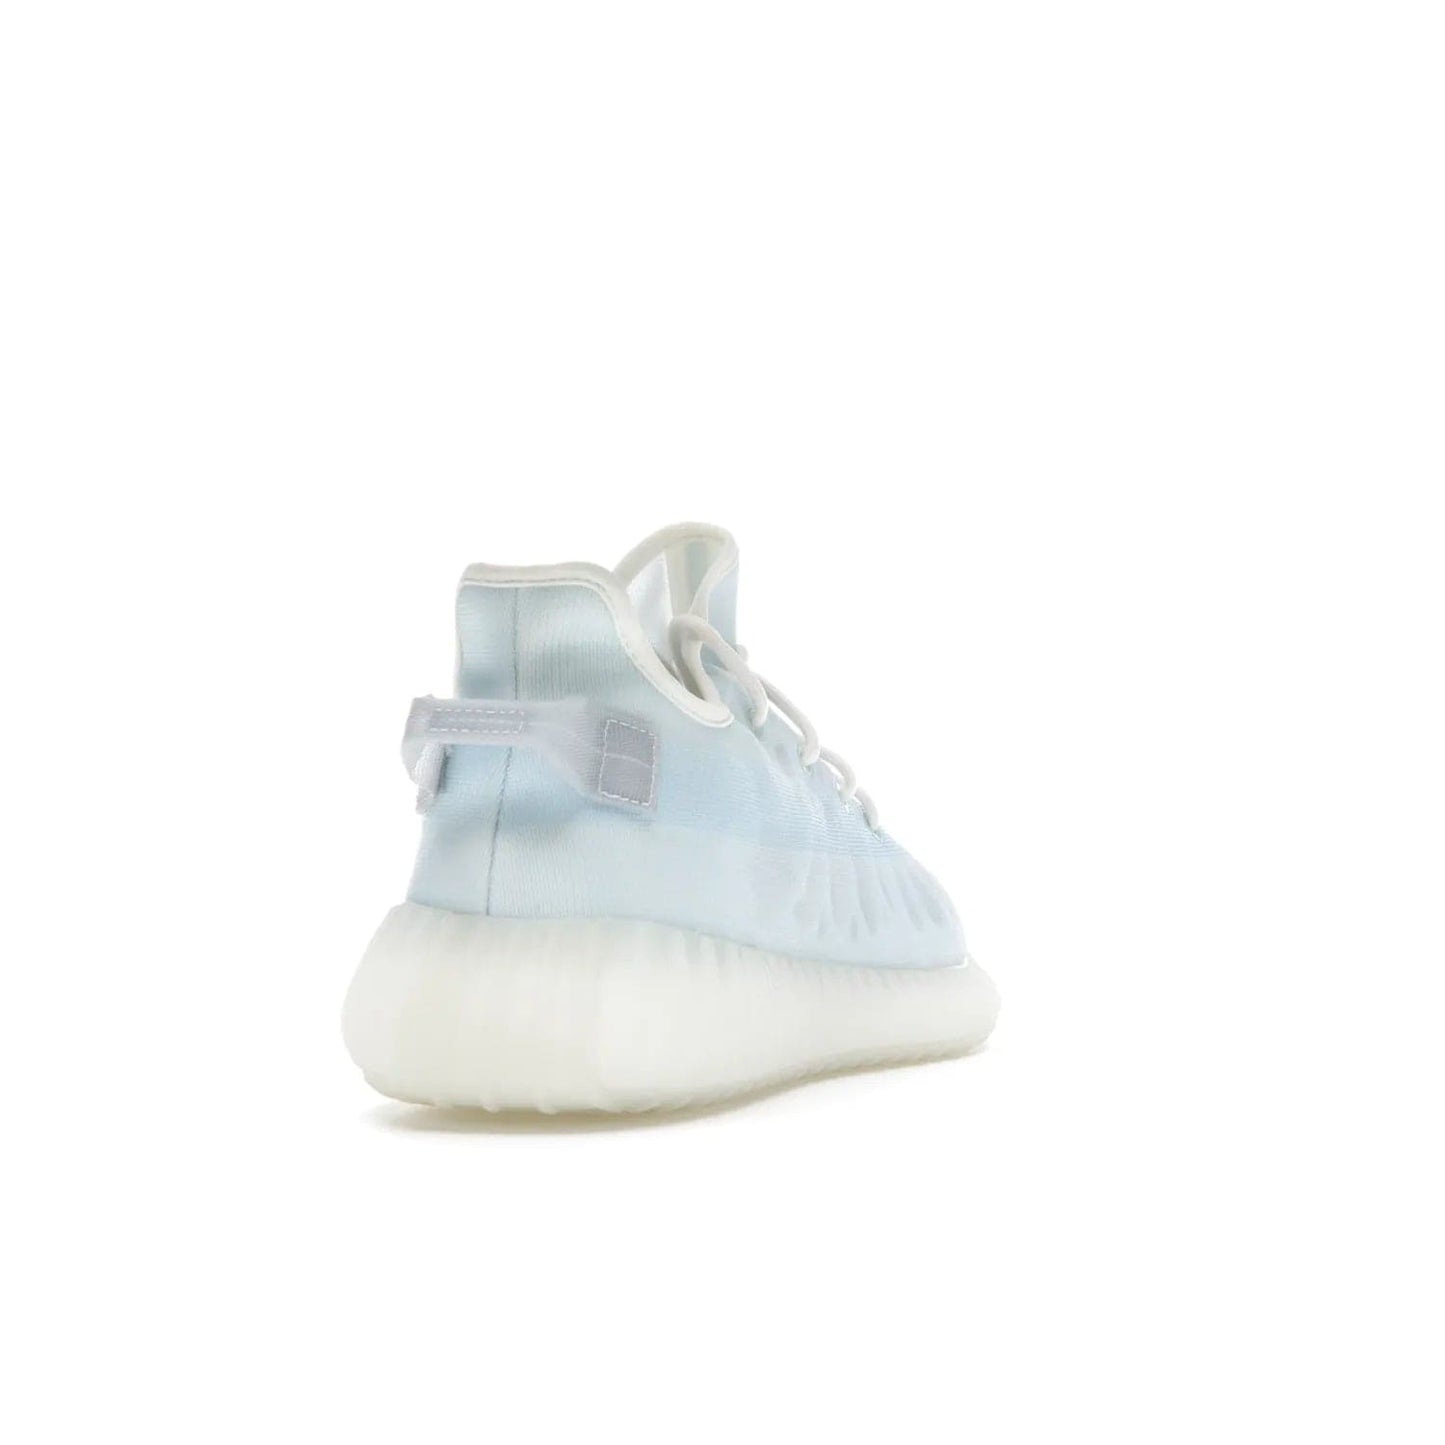 adidas Yeezy Boost 350 V2 Mono Ice - Image 30 - Only at www.BallersClubKickz.com - Introducing the adidas Yeezy 350 V2 Mono Ice - a sleek monofilament mesh design in Ice blue with Boost sole and heel pull tab. Released exclusively in the US for $220.